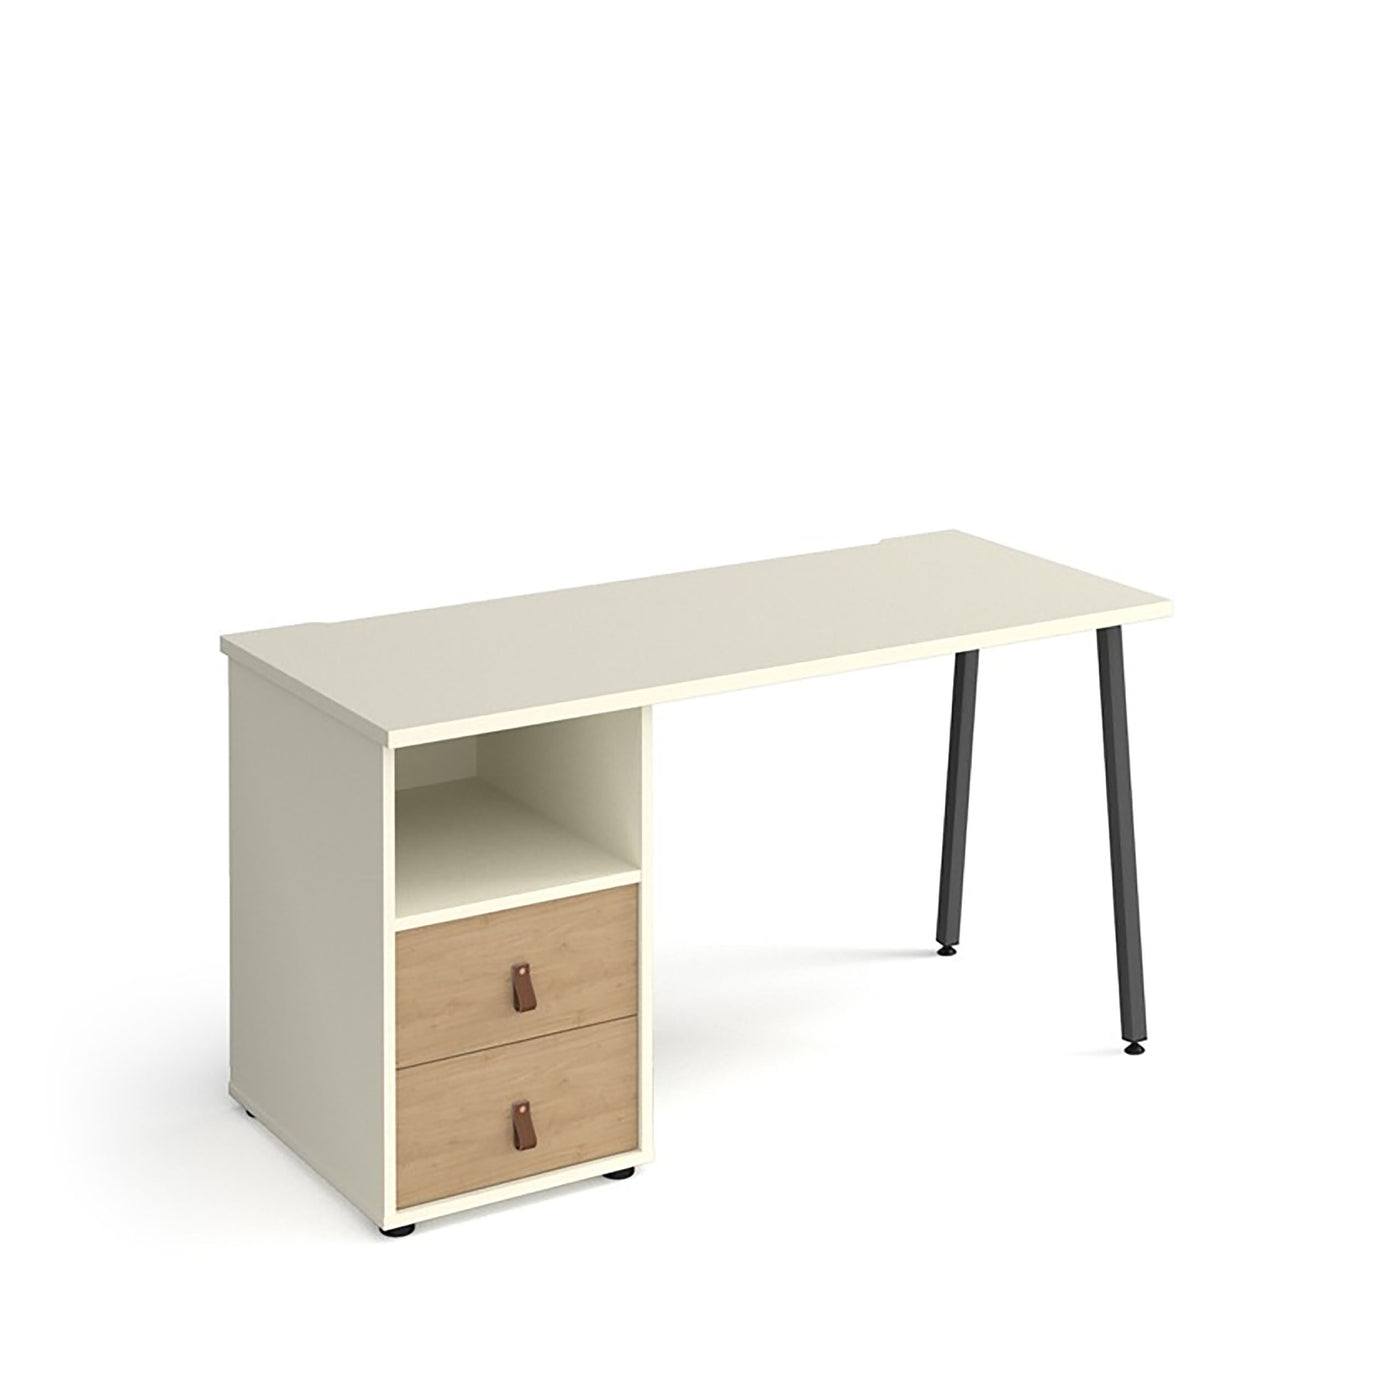 Sparta Desk with Drawers | Home Office Desk with Storage | Home Office | Home Office Furniture | Study Desk | Work From Home Desk 